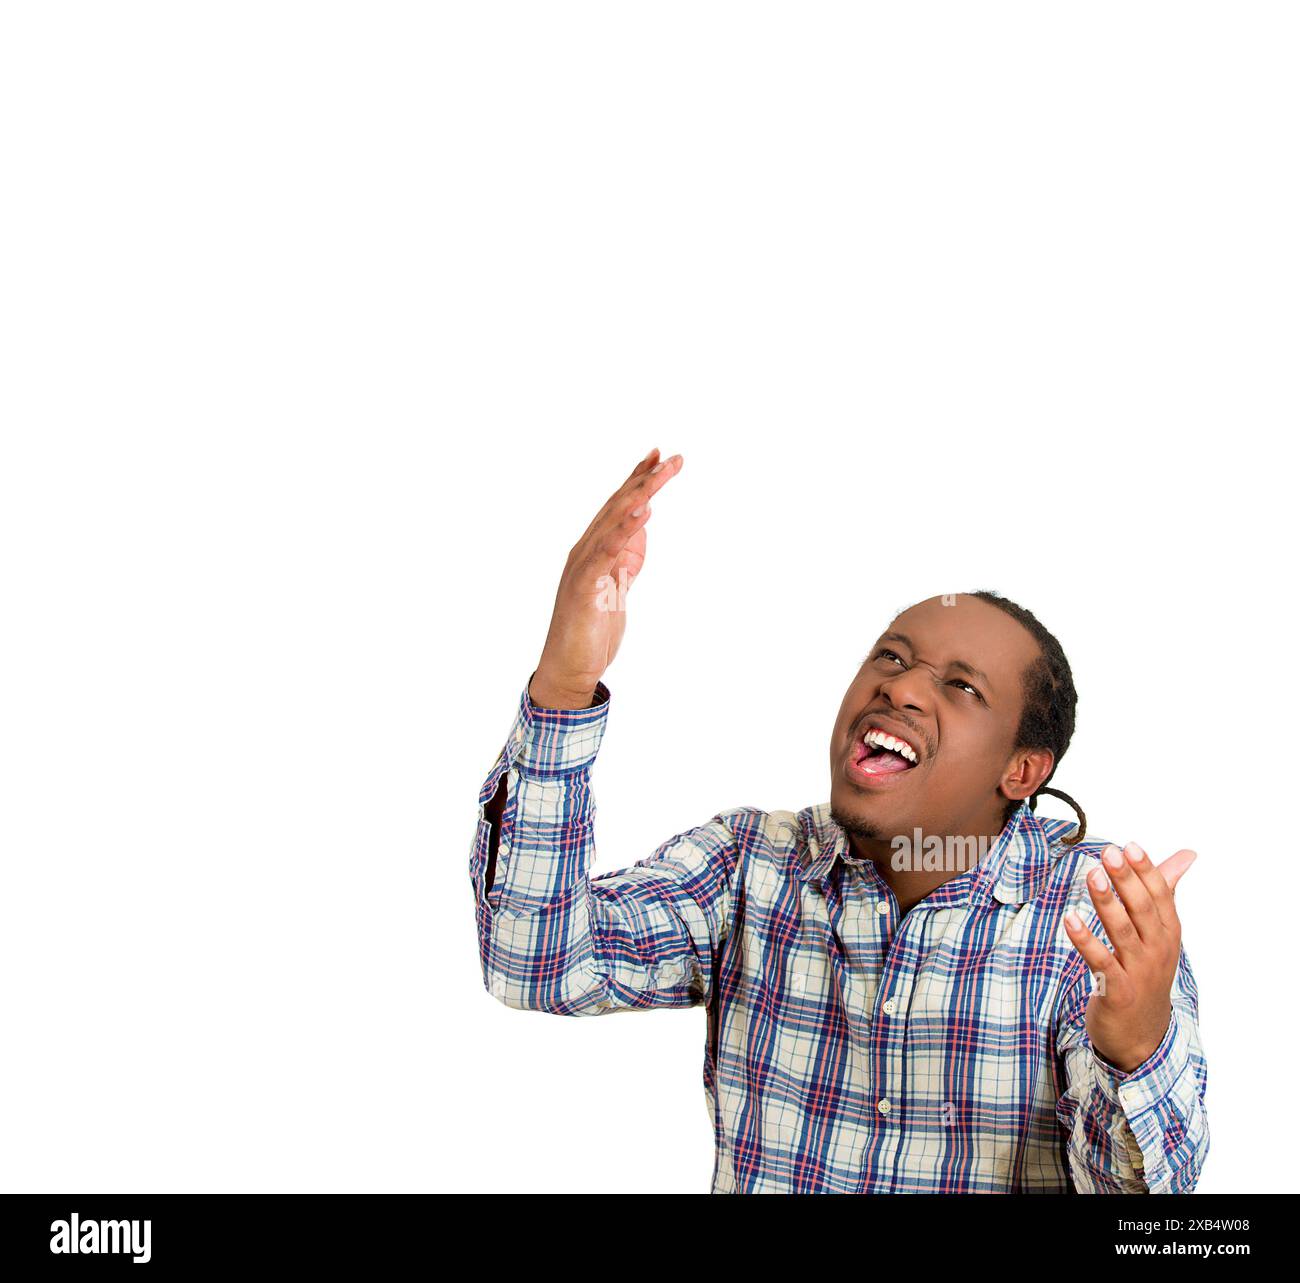 portrait of a young angry unhappy, stressed man looking up, screaming to stop making loud noise ,isolated on white background. Stock Photo